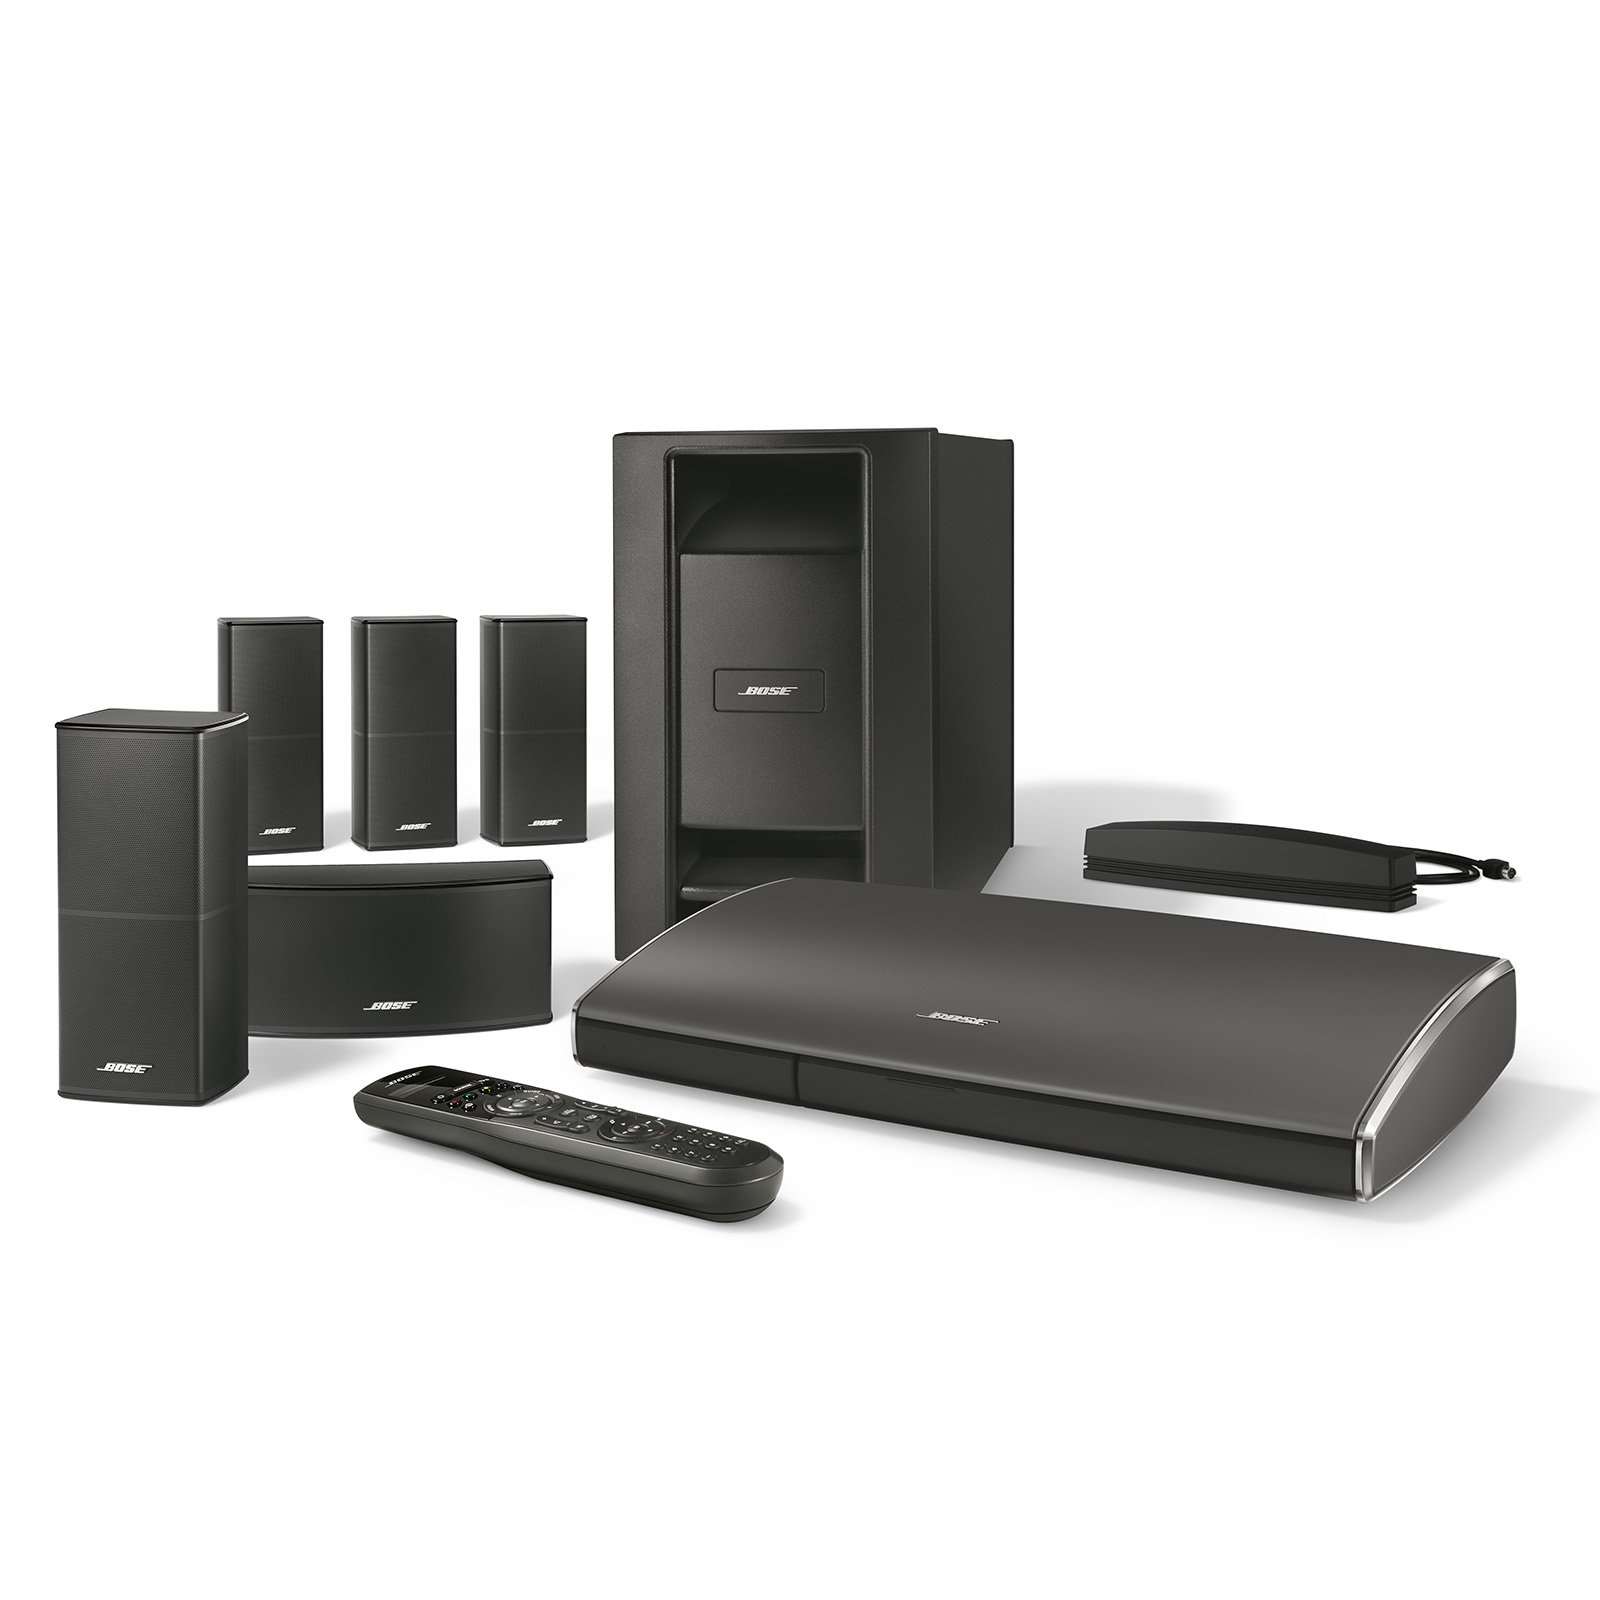 Lifestyle SoundTouch 235 entertainment system